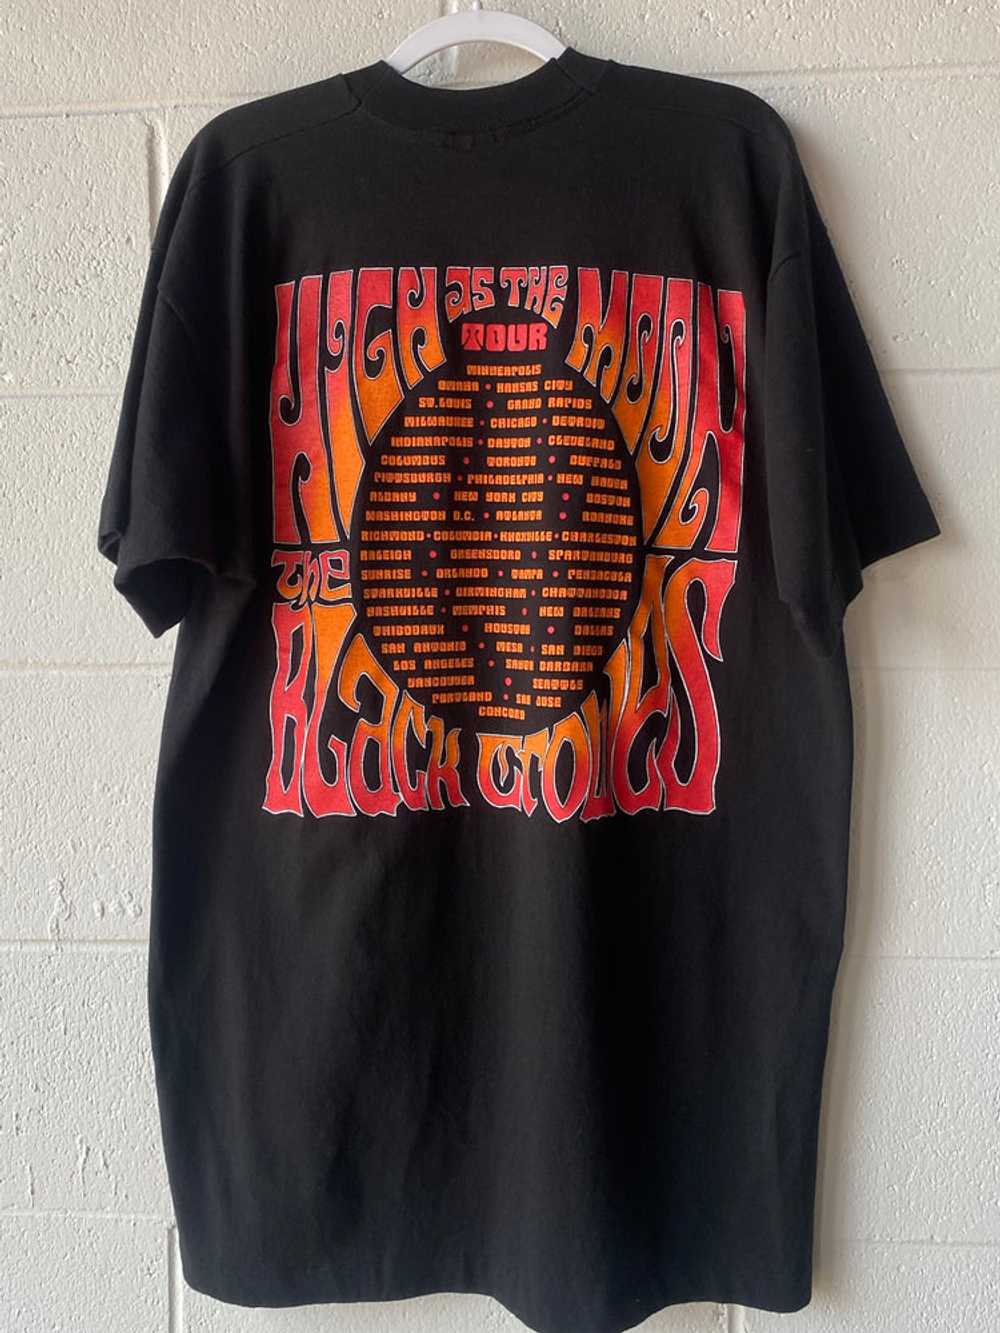 The Black Crowes HIgh as the Moon Tour T-shirt - image 2